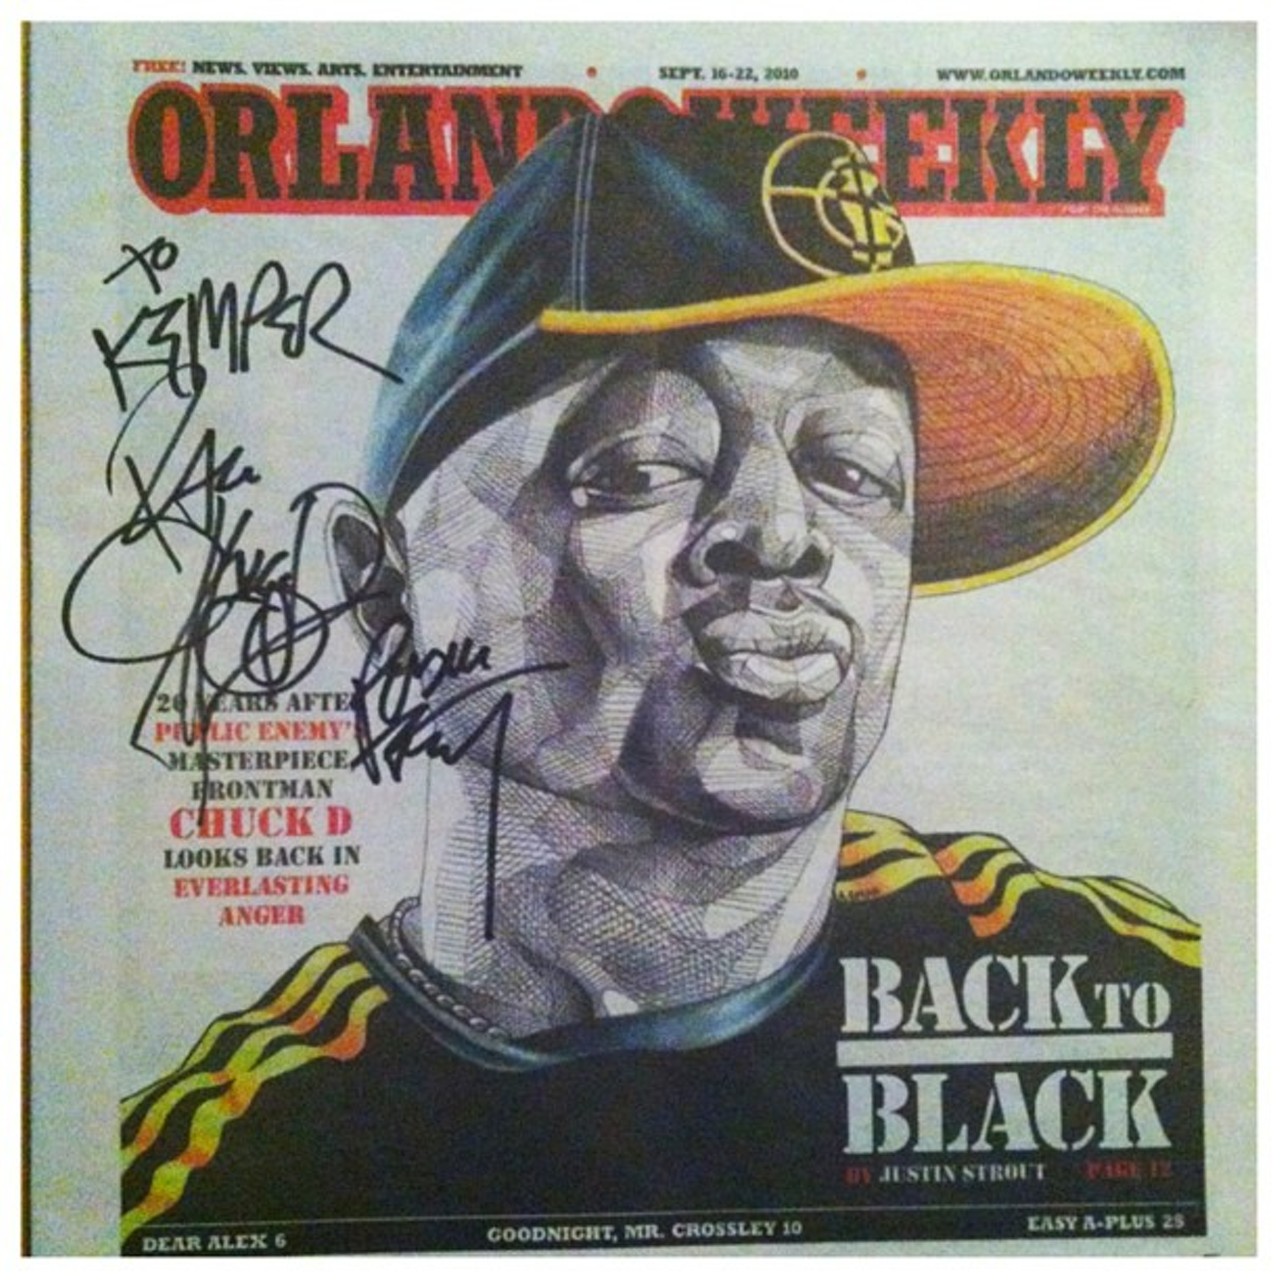 Chuck D signed the Orlando Weekly cover illustrated by local artist Andrew Spear, via @spearlife in Instagram.